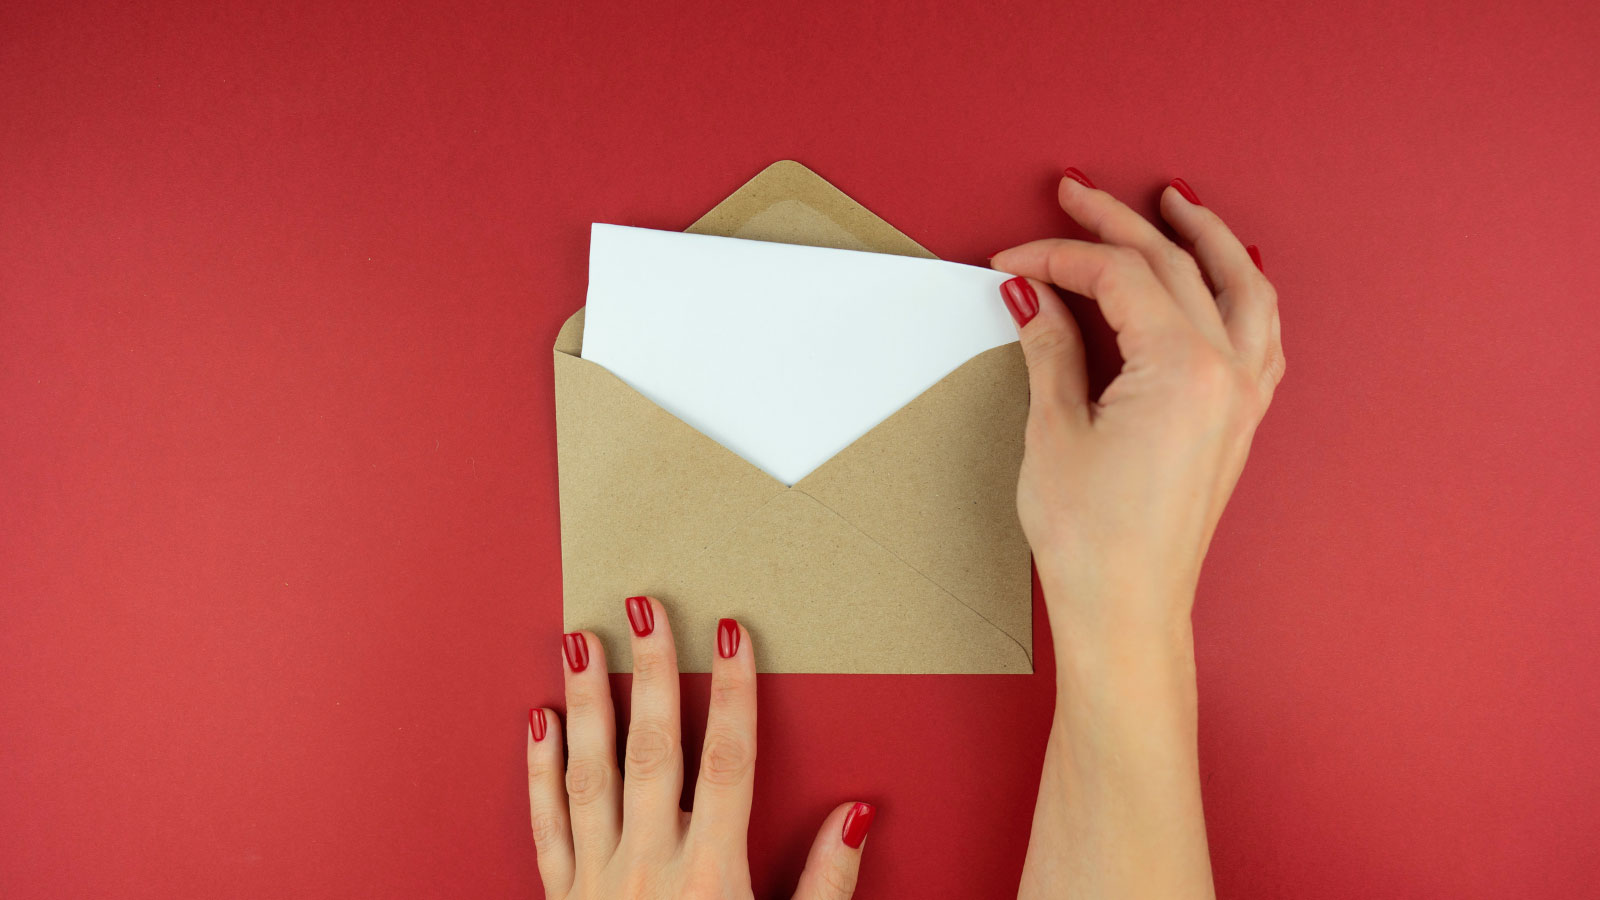 Hands opening an envelope